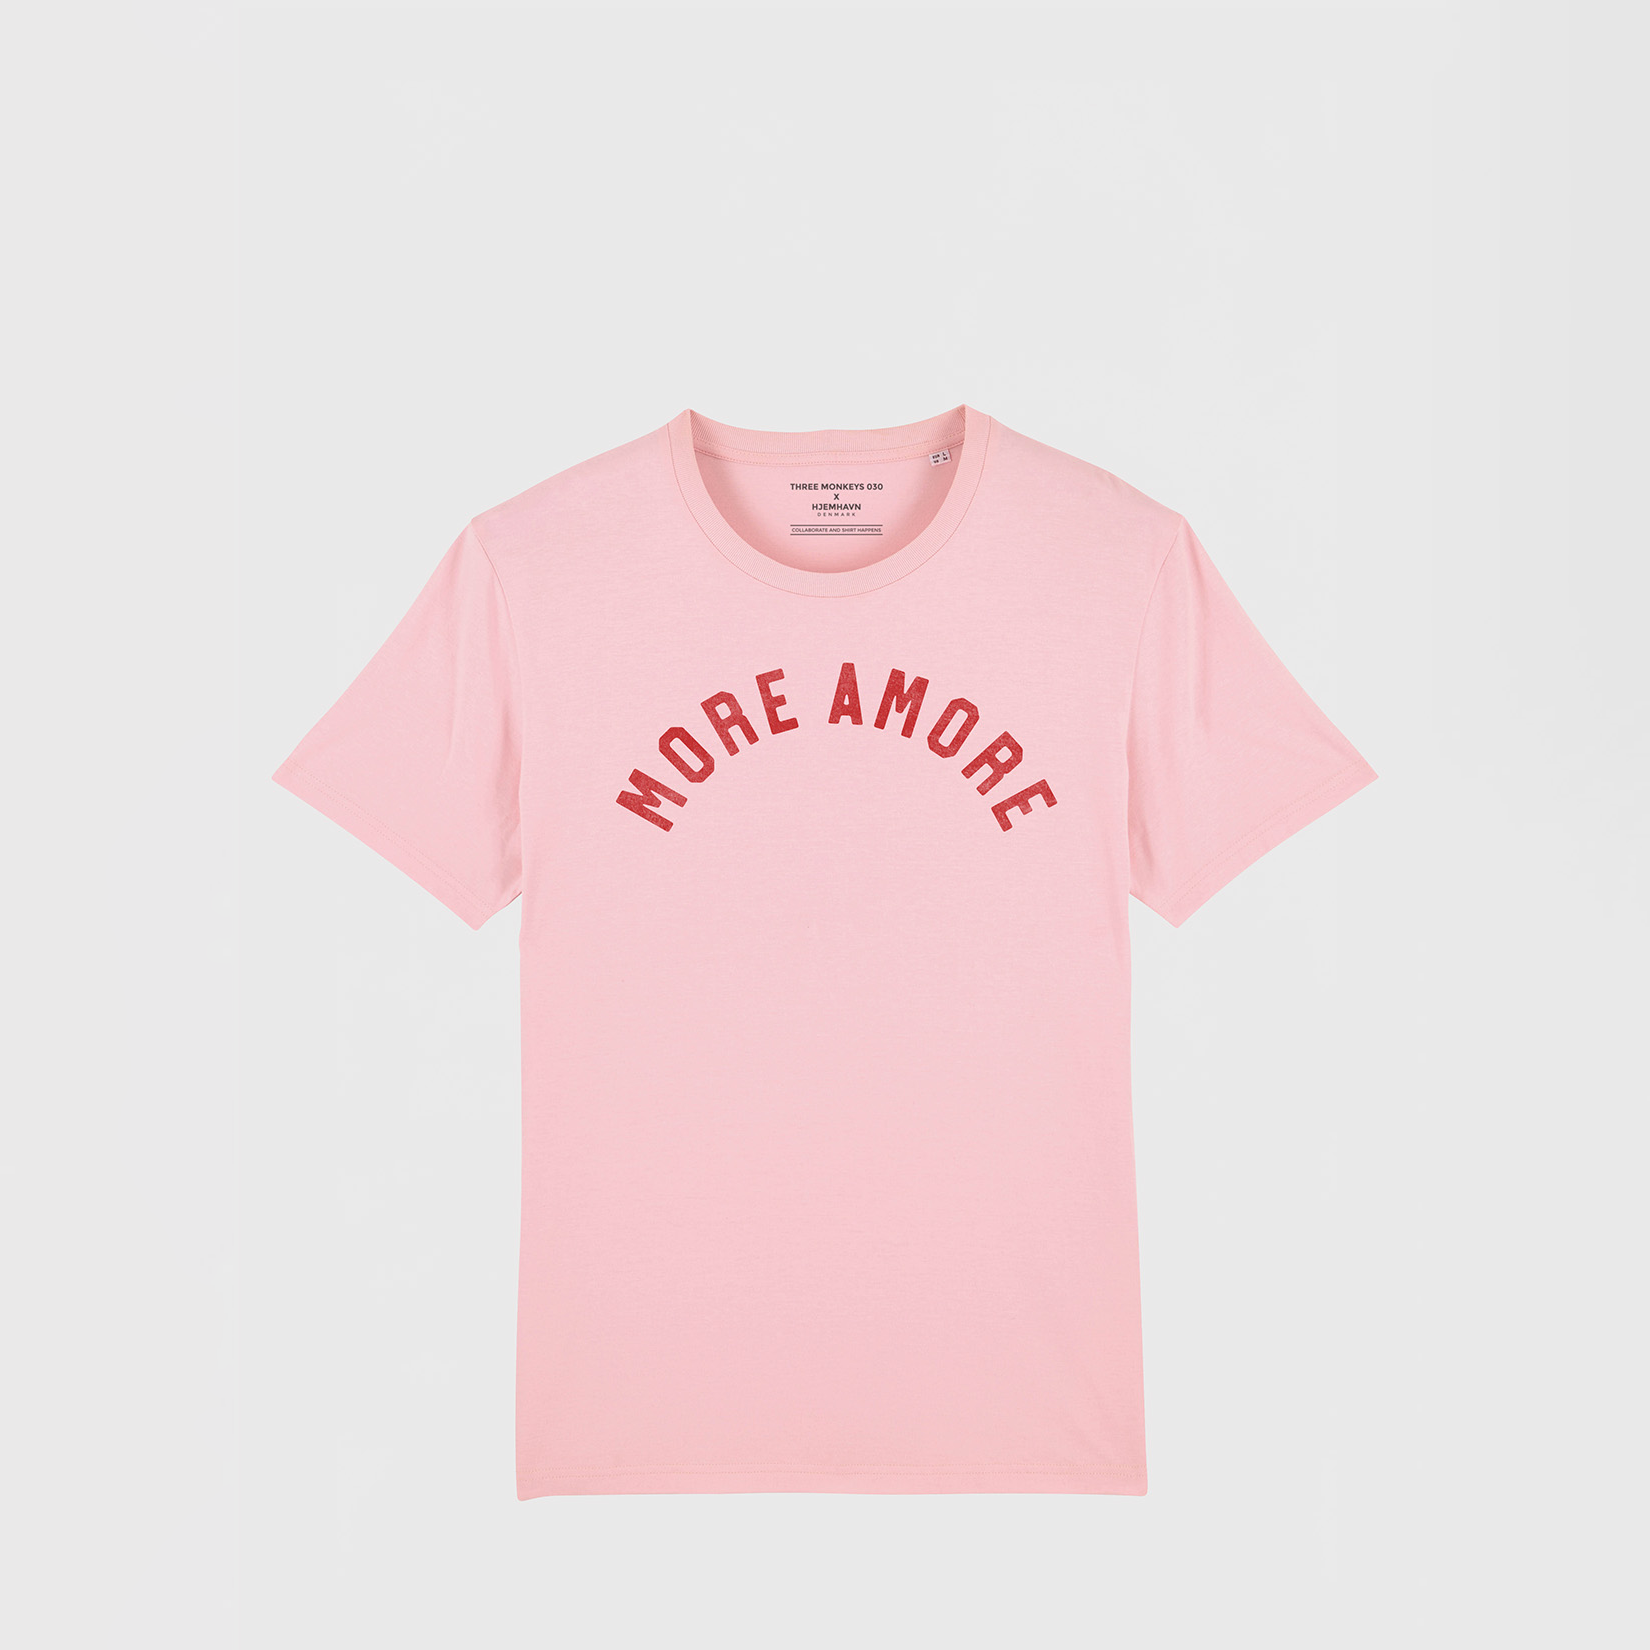 T-Shirt "MORE AMORE" rosa mit roten print, designed by Three Monkeys 030